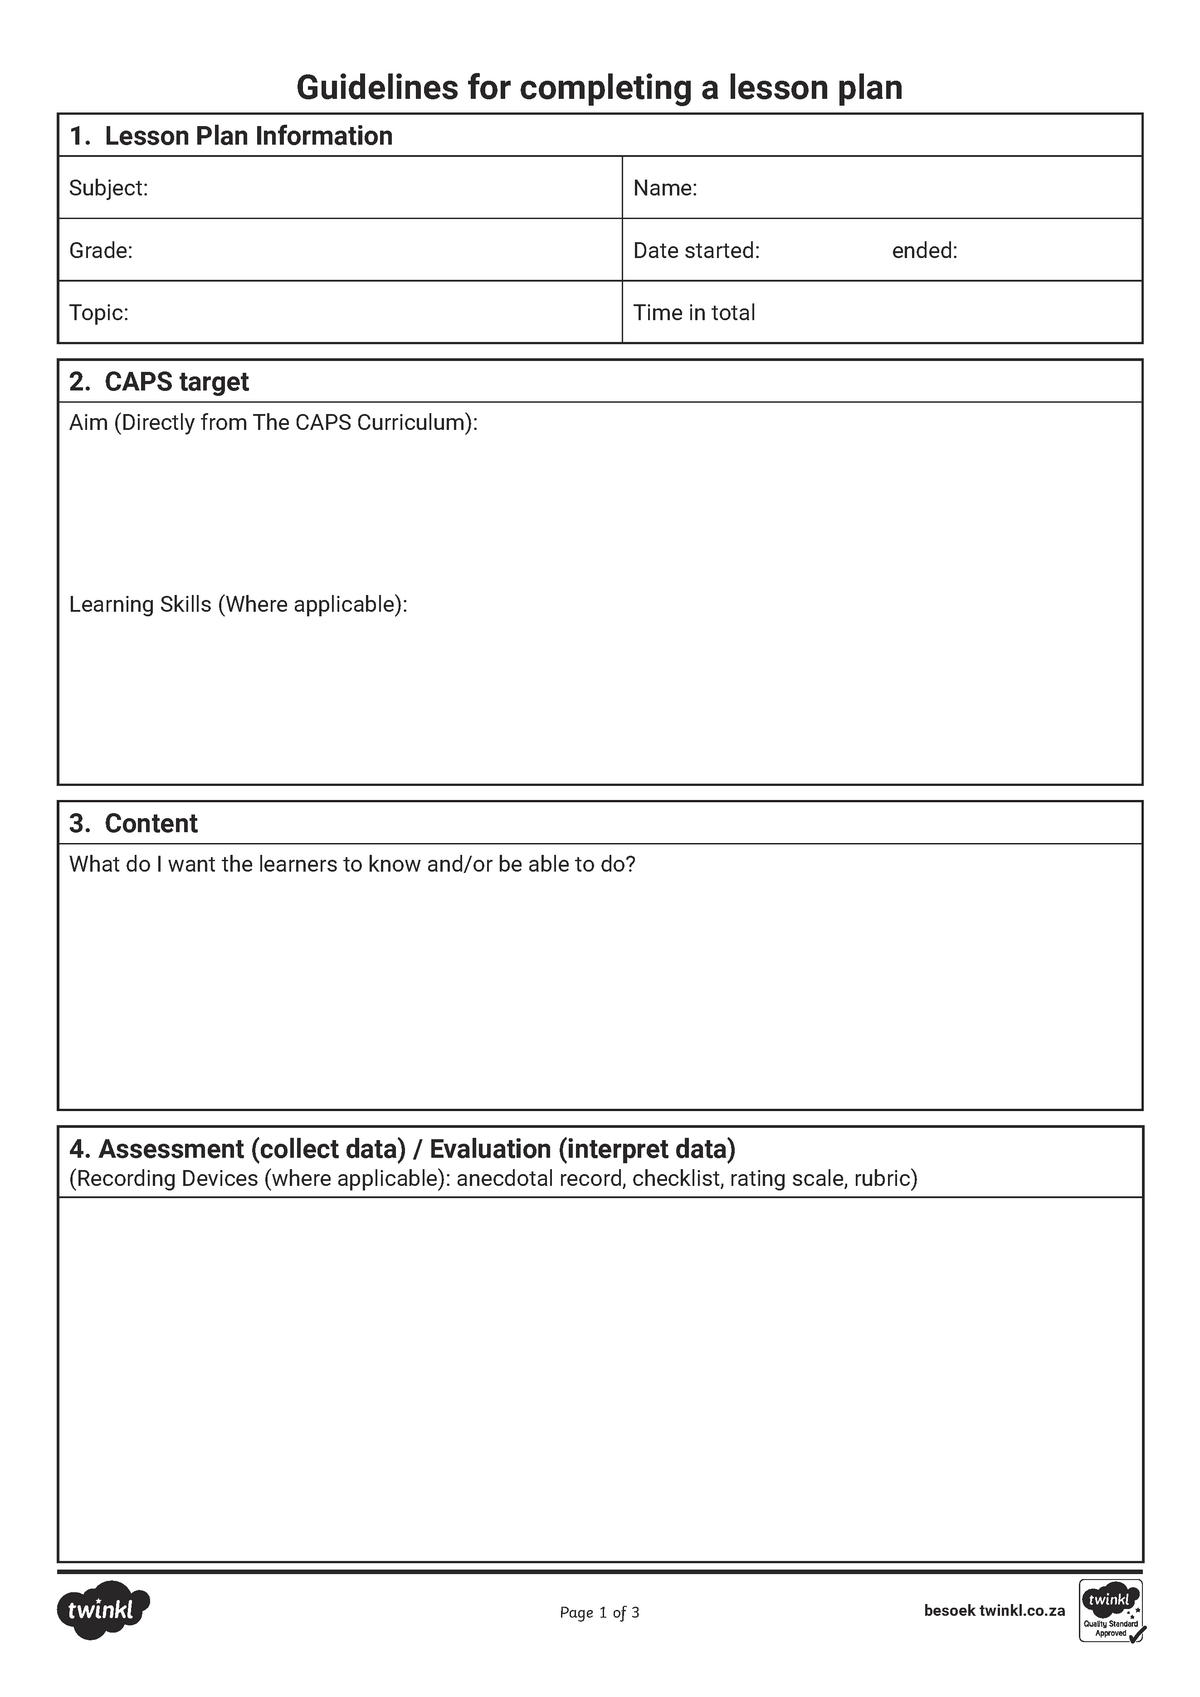 za-hl-24-caps-lesson-planning-template-ver-3-guidelines-for